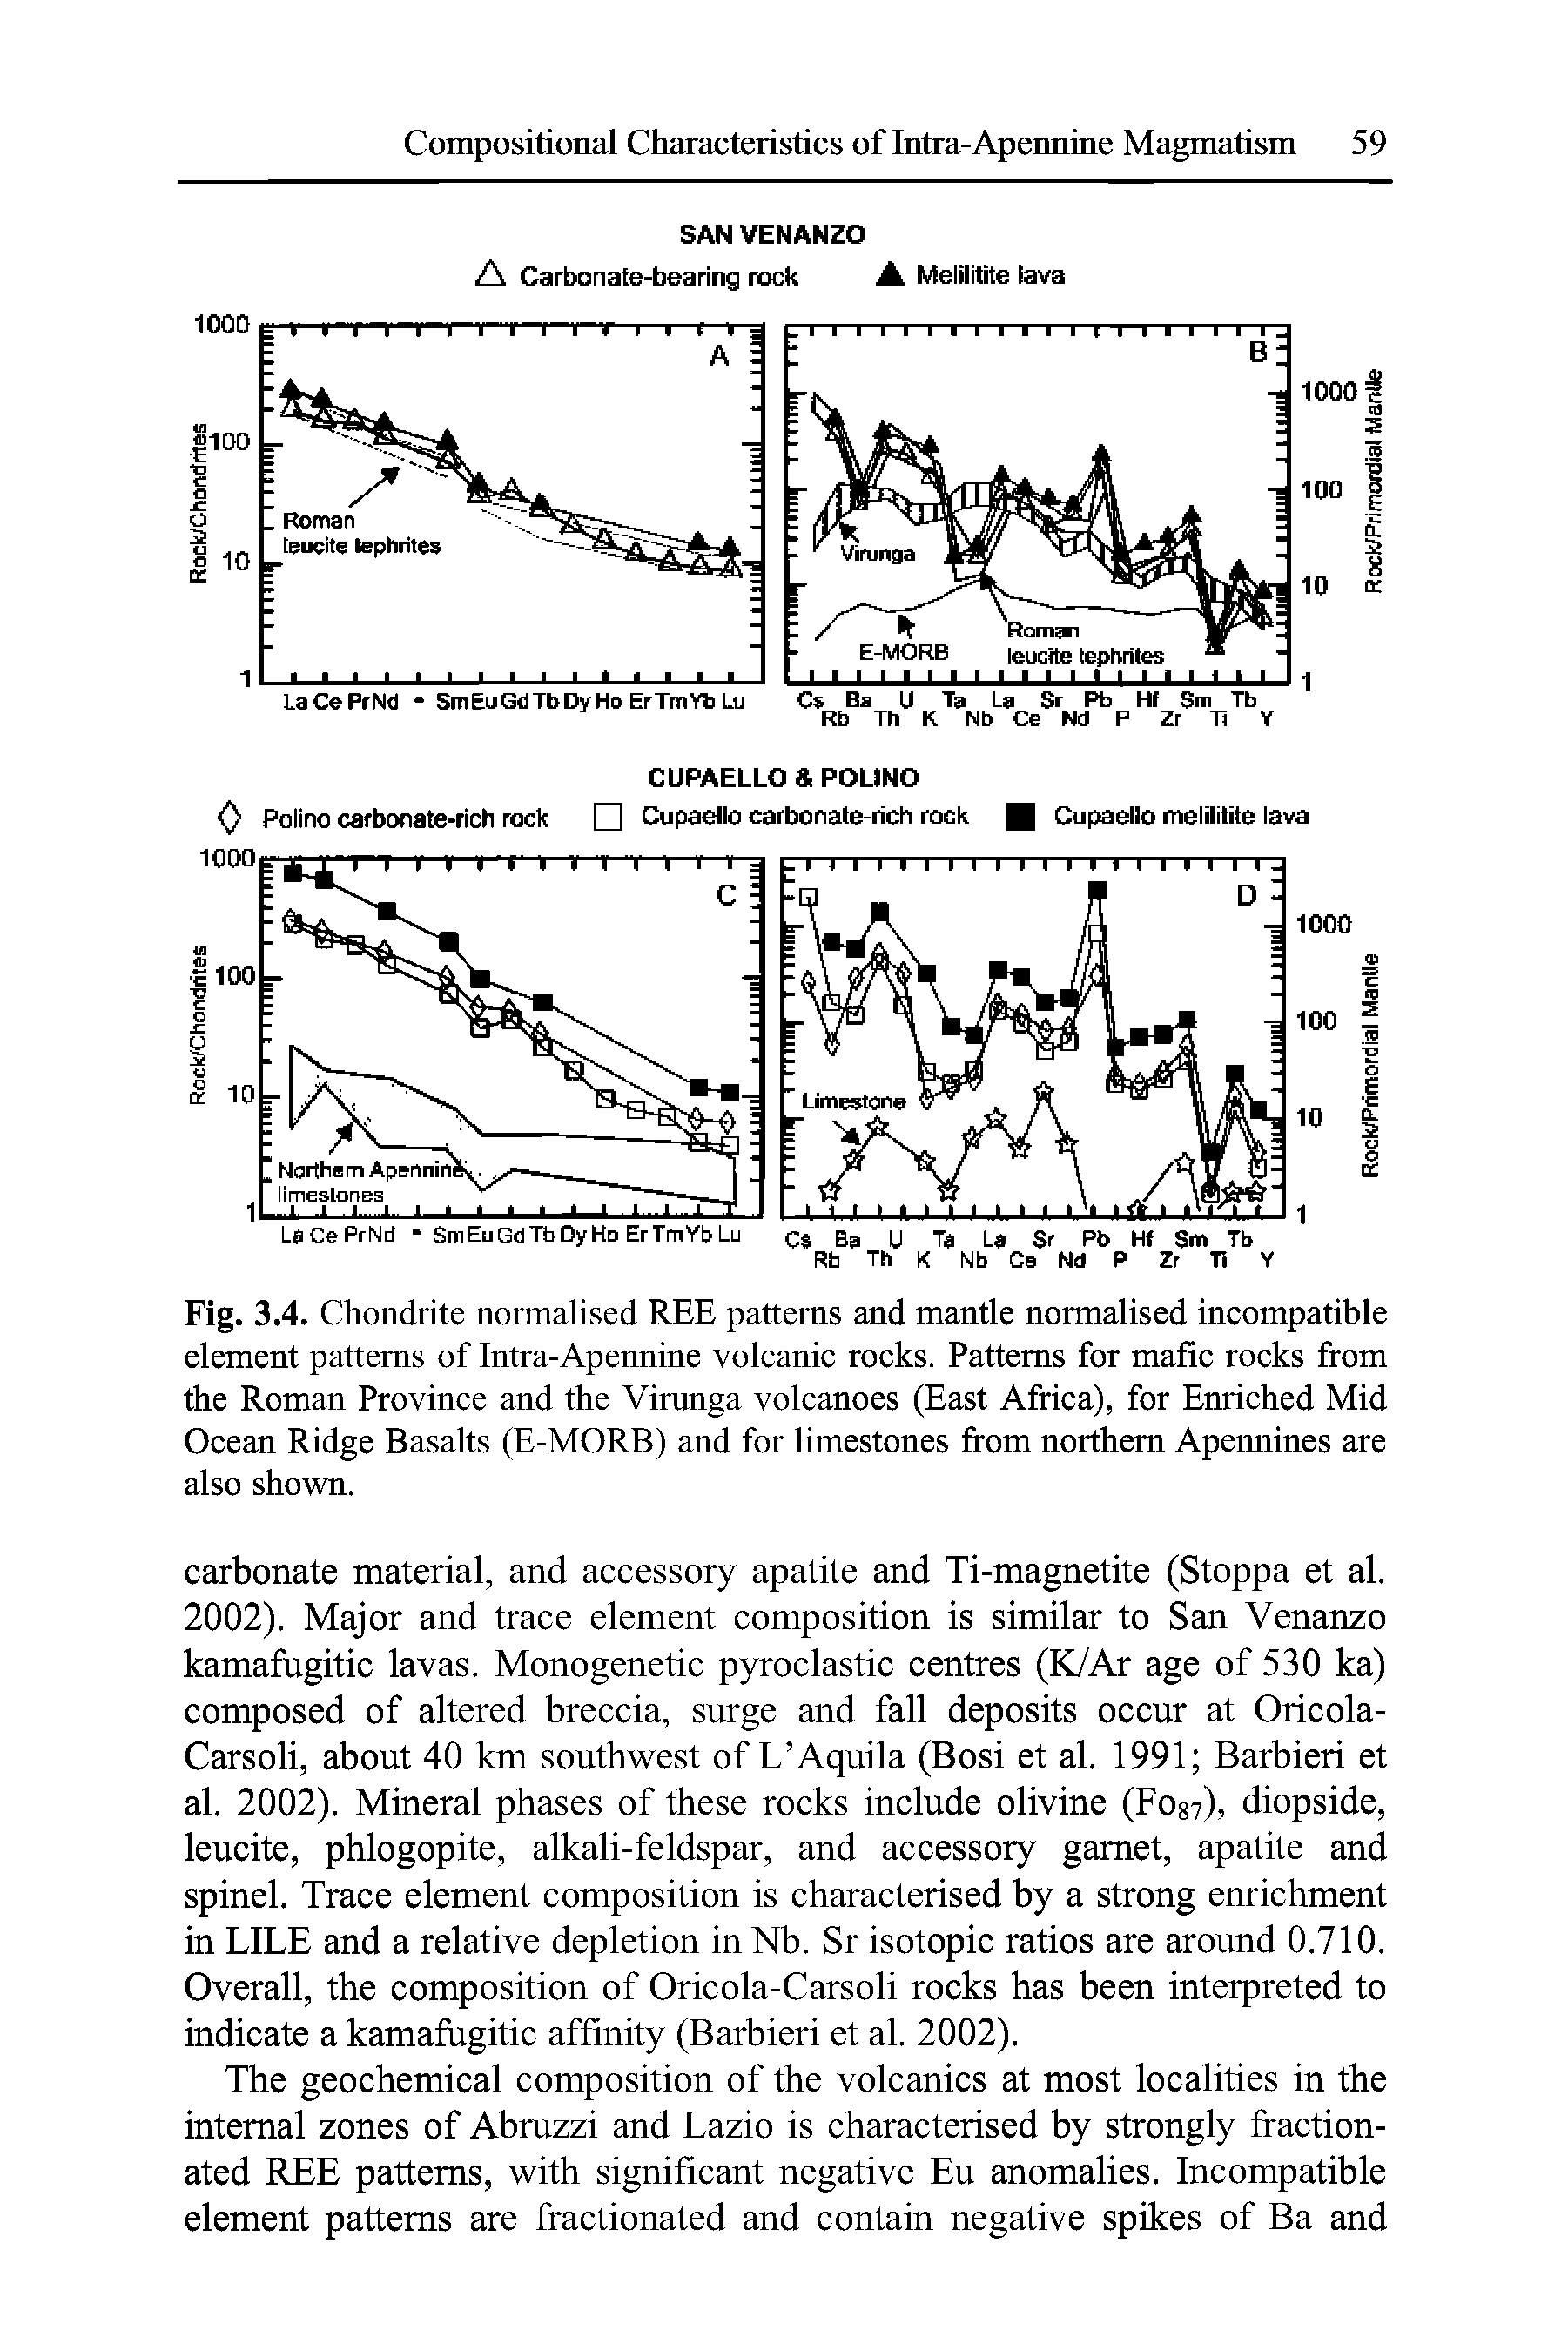 Fig. 3.4. Chondrite normalised REE patterns and mantle normalised incompatible element patterns of Intra-Apennine volcanic rocks. Patterns for mafic rocks from the Roman Province and the Virunga volcanoes (East Africa), for Enriched Mid Ocean Ridge Basalts (E-MORB) and for limestones from northern Apennines are also shown.